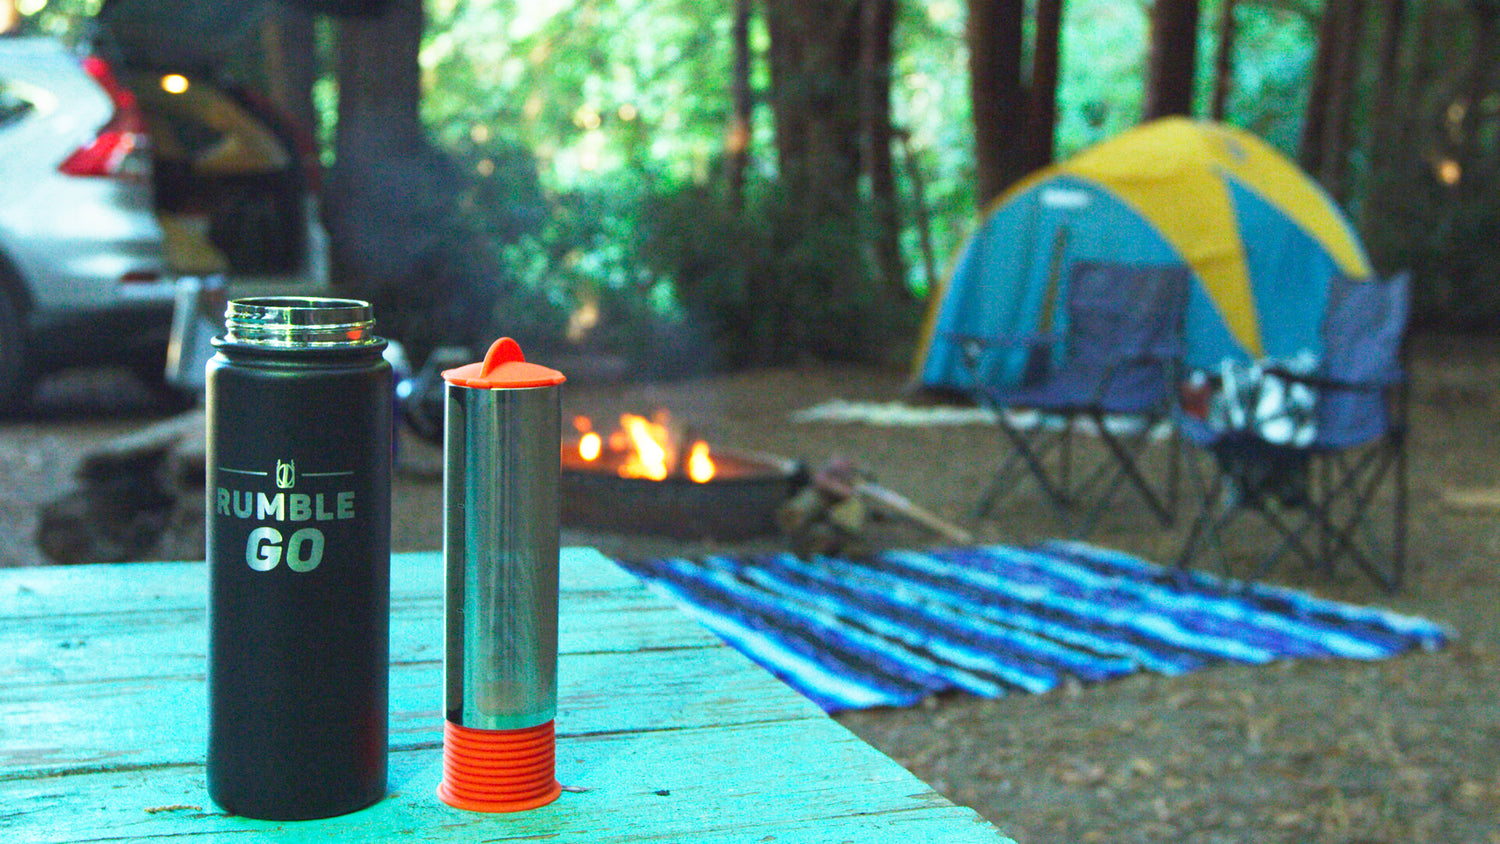 Rumble Go portable cold brew coffee filter works great for camping and outdoor activities